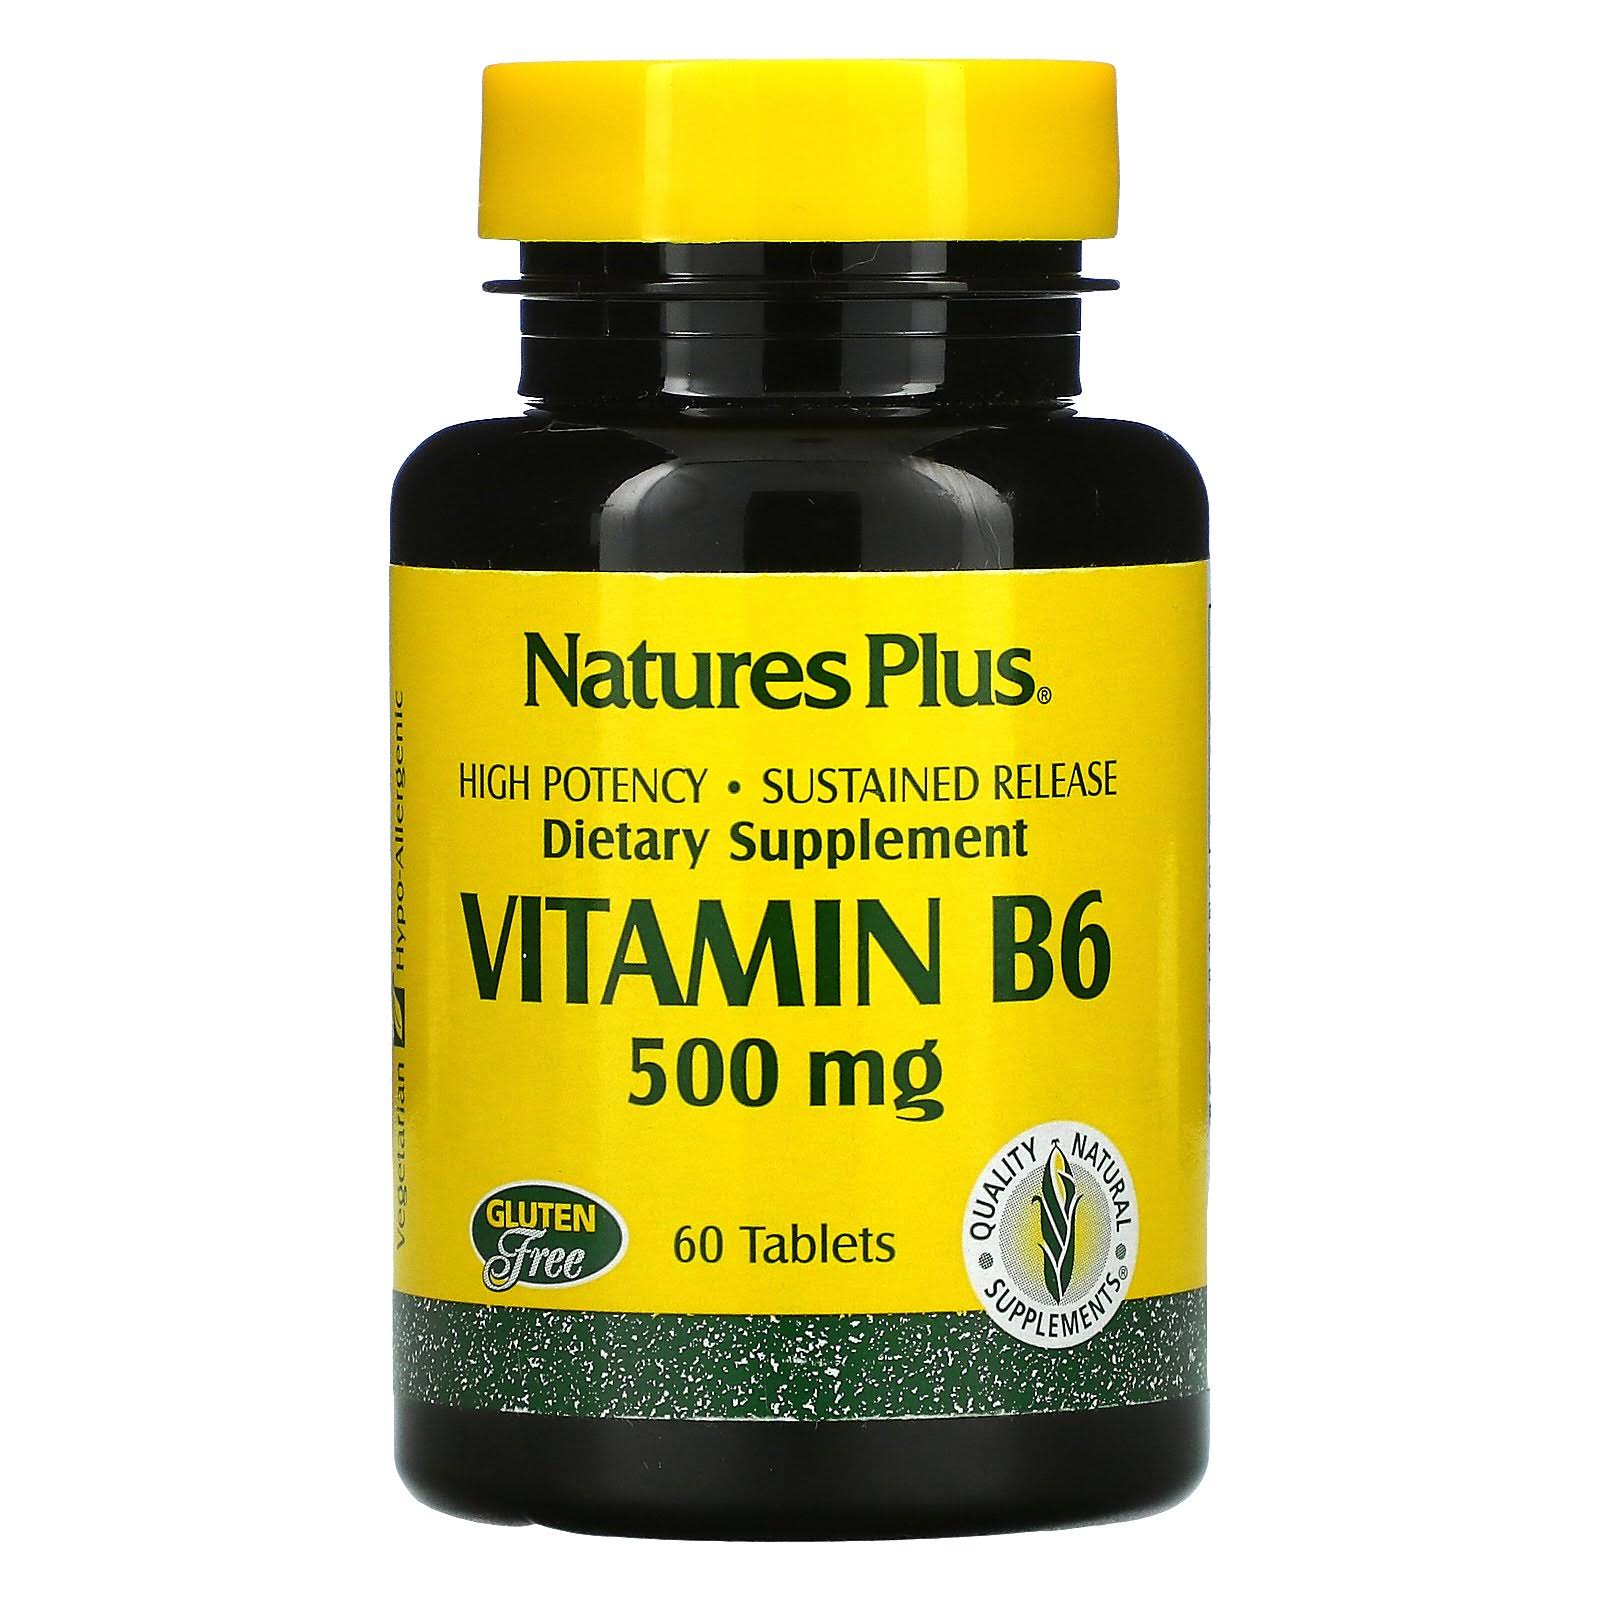 NaturesPlus, Vitamin B6, Sustained Release, 500 mg, 60 Tablets